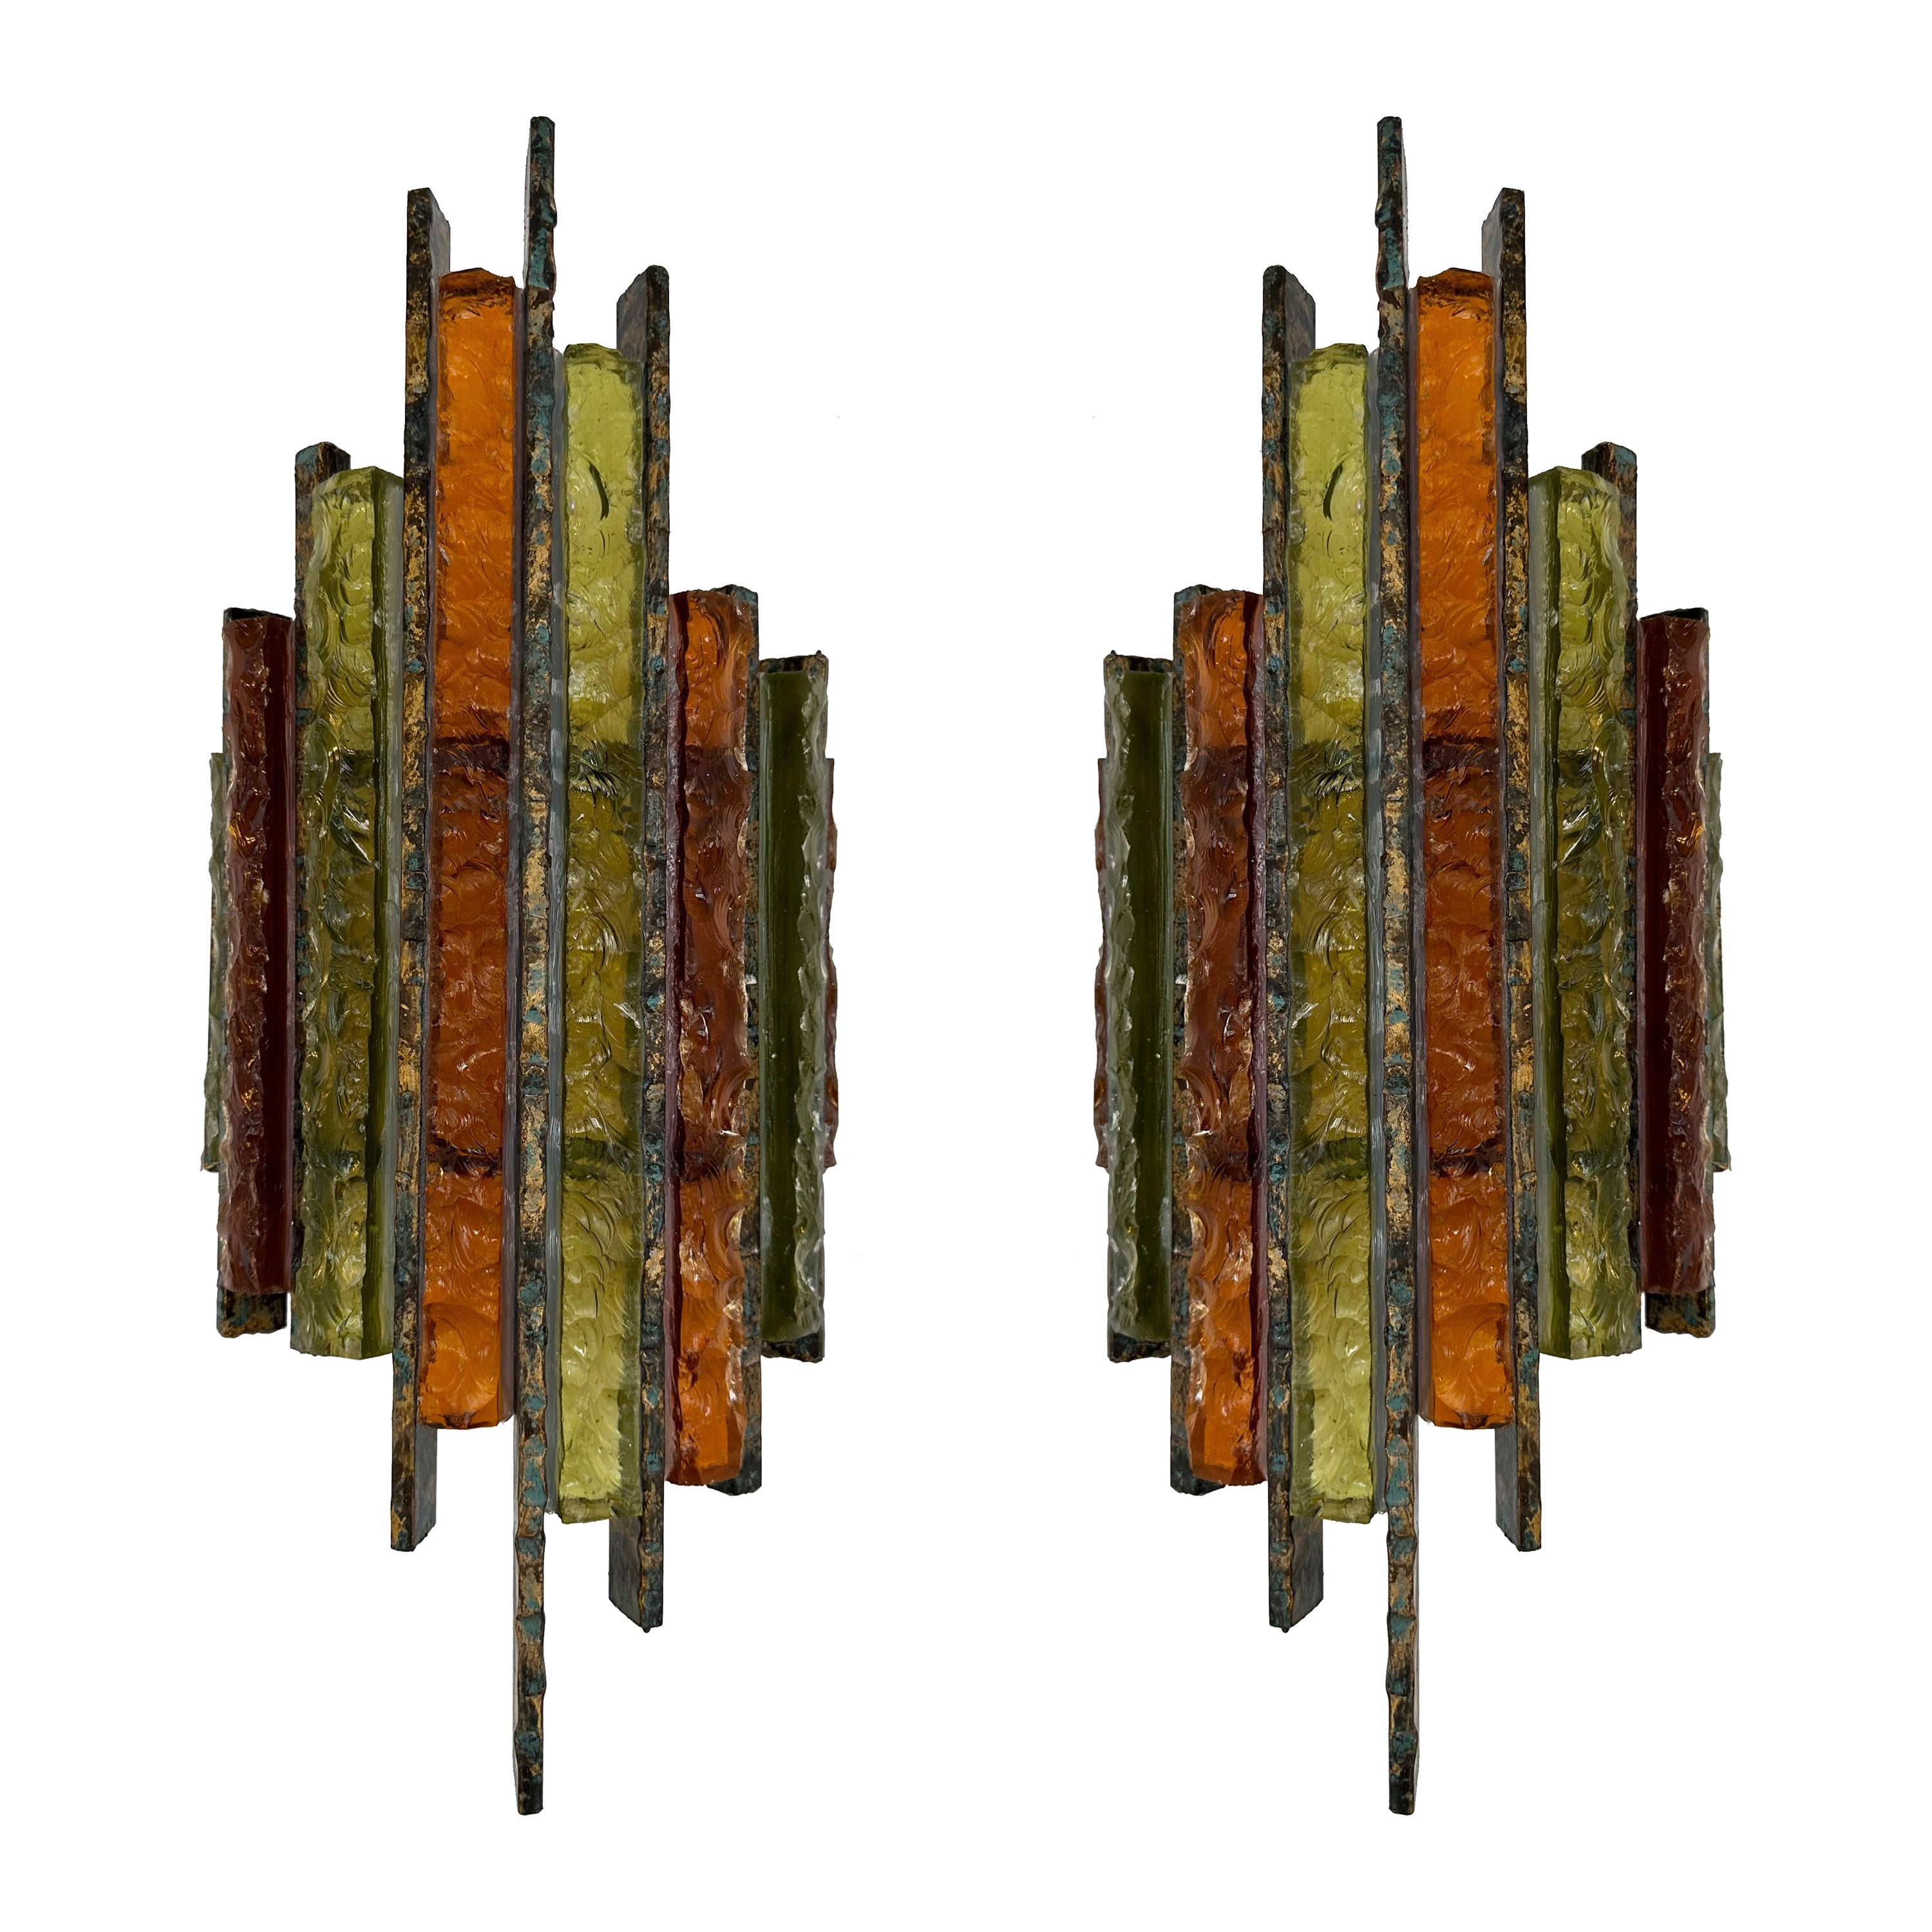 Pair of Hammered Glass Wrought Iron Sconces by Longobard, Italy, 1970s